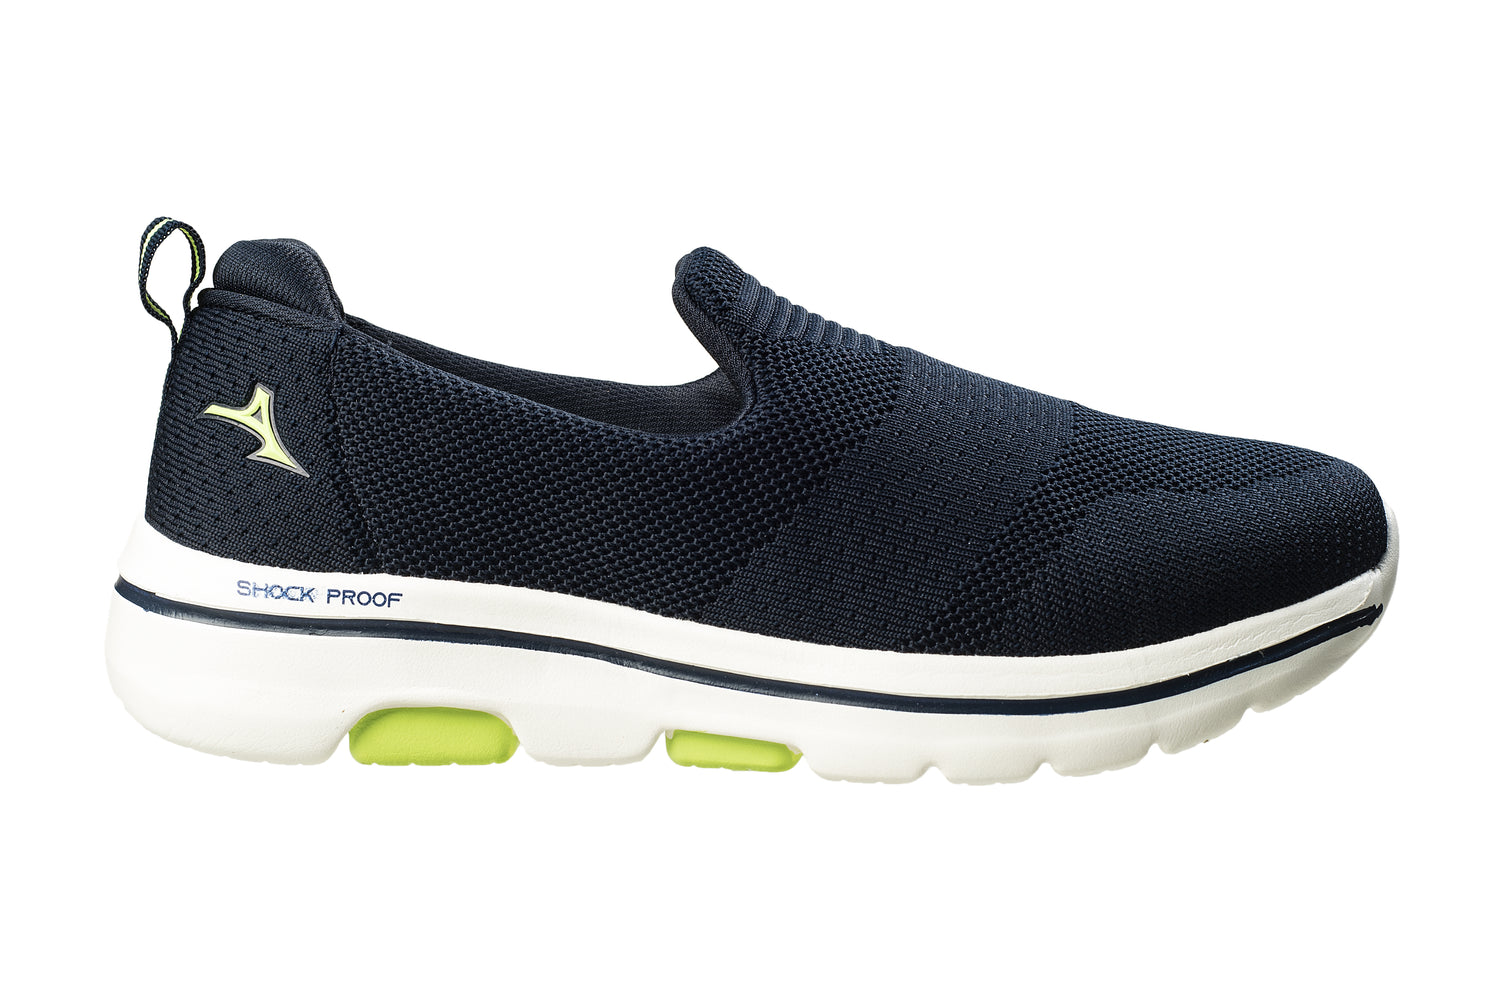 Abros Gents Navy / P. Green Sports Shoe